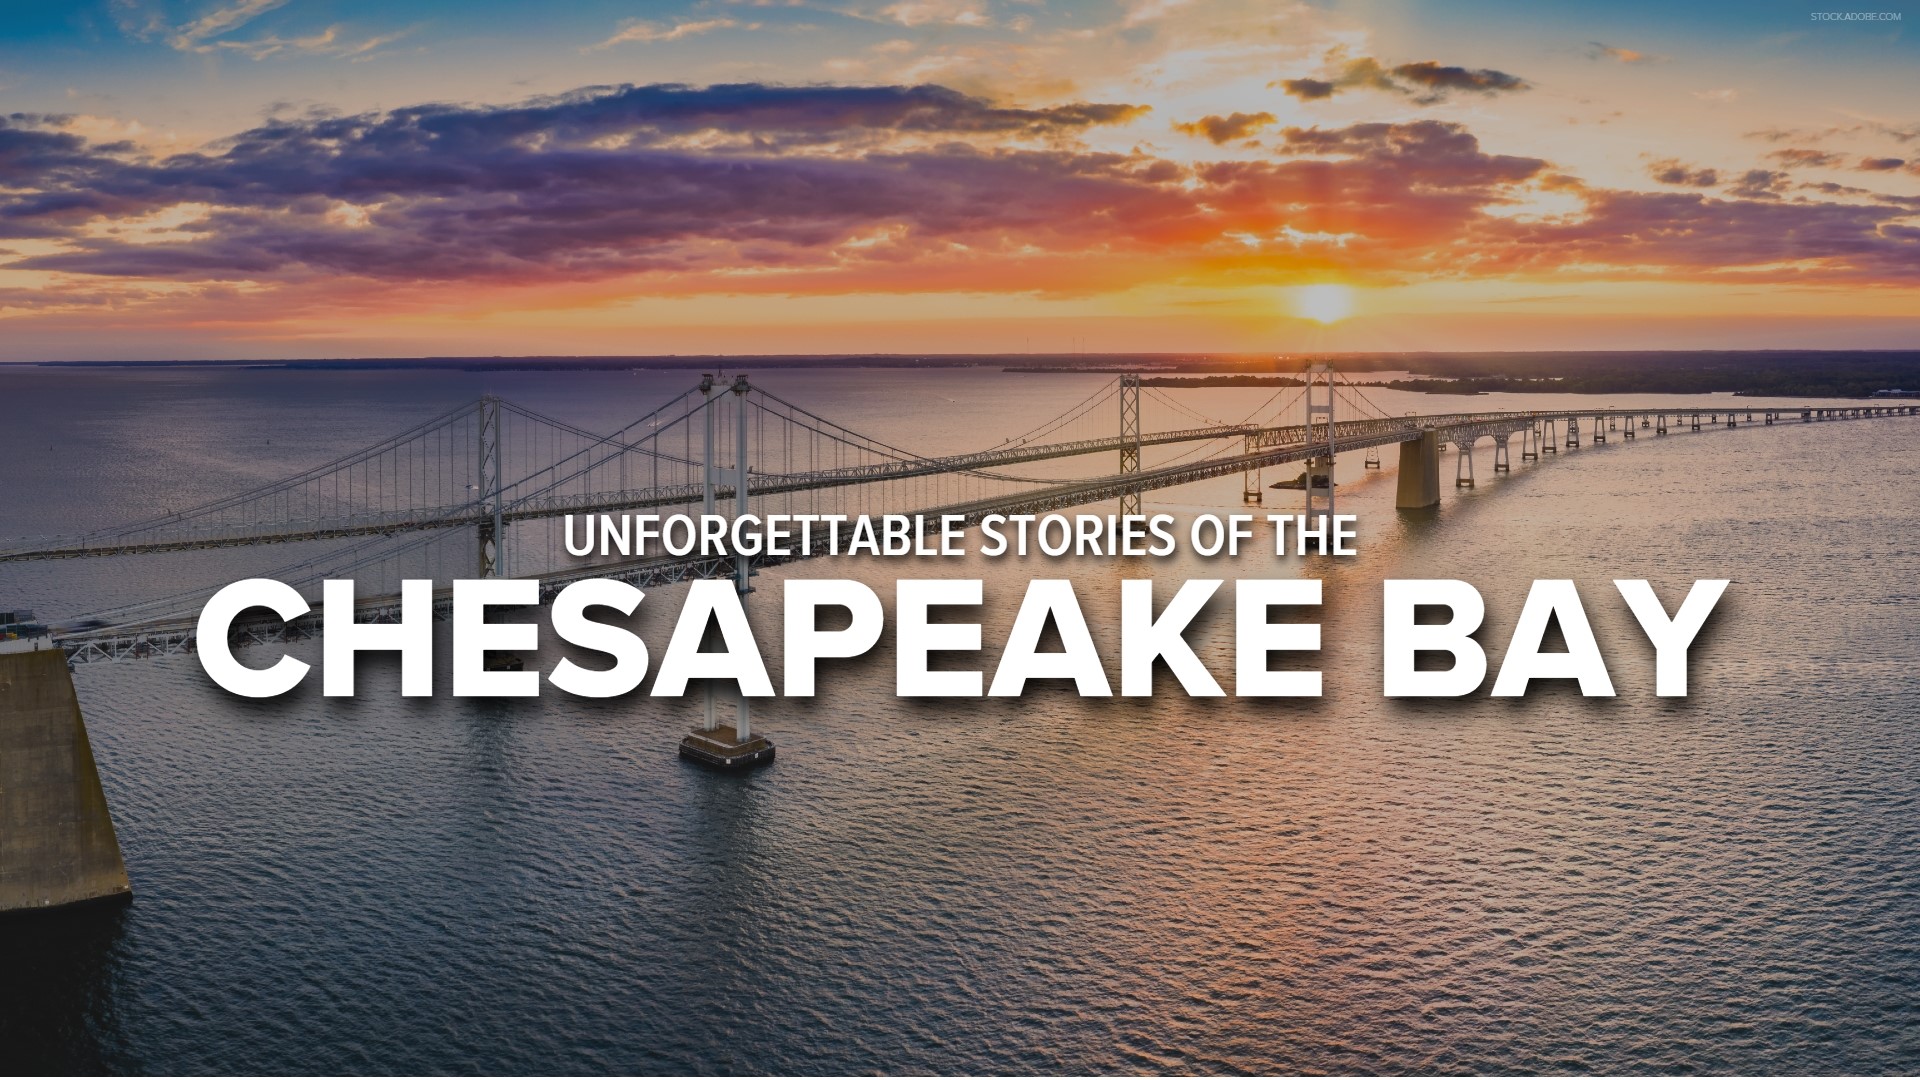 Travel to the Chesapeake Bay, and all the way up the Susquehanna River to where its waters start in Upstate New York in this Capital Emmy Award-Winning special.